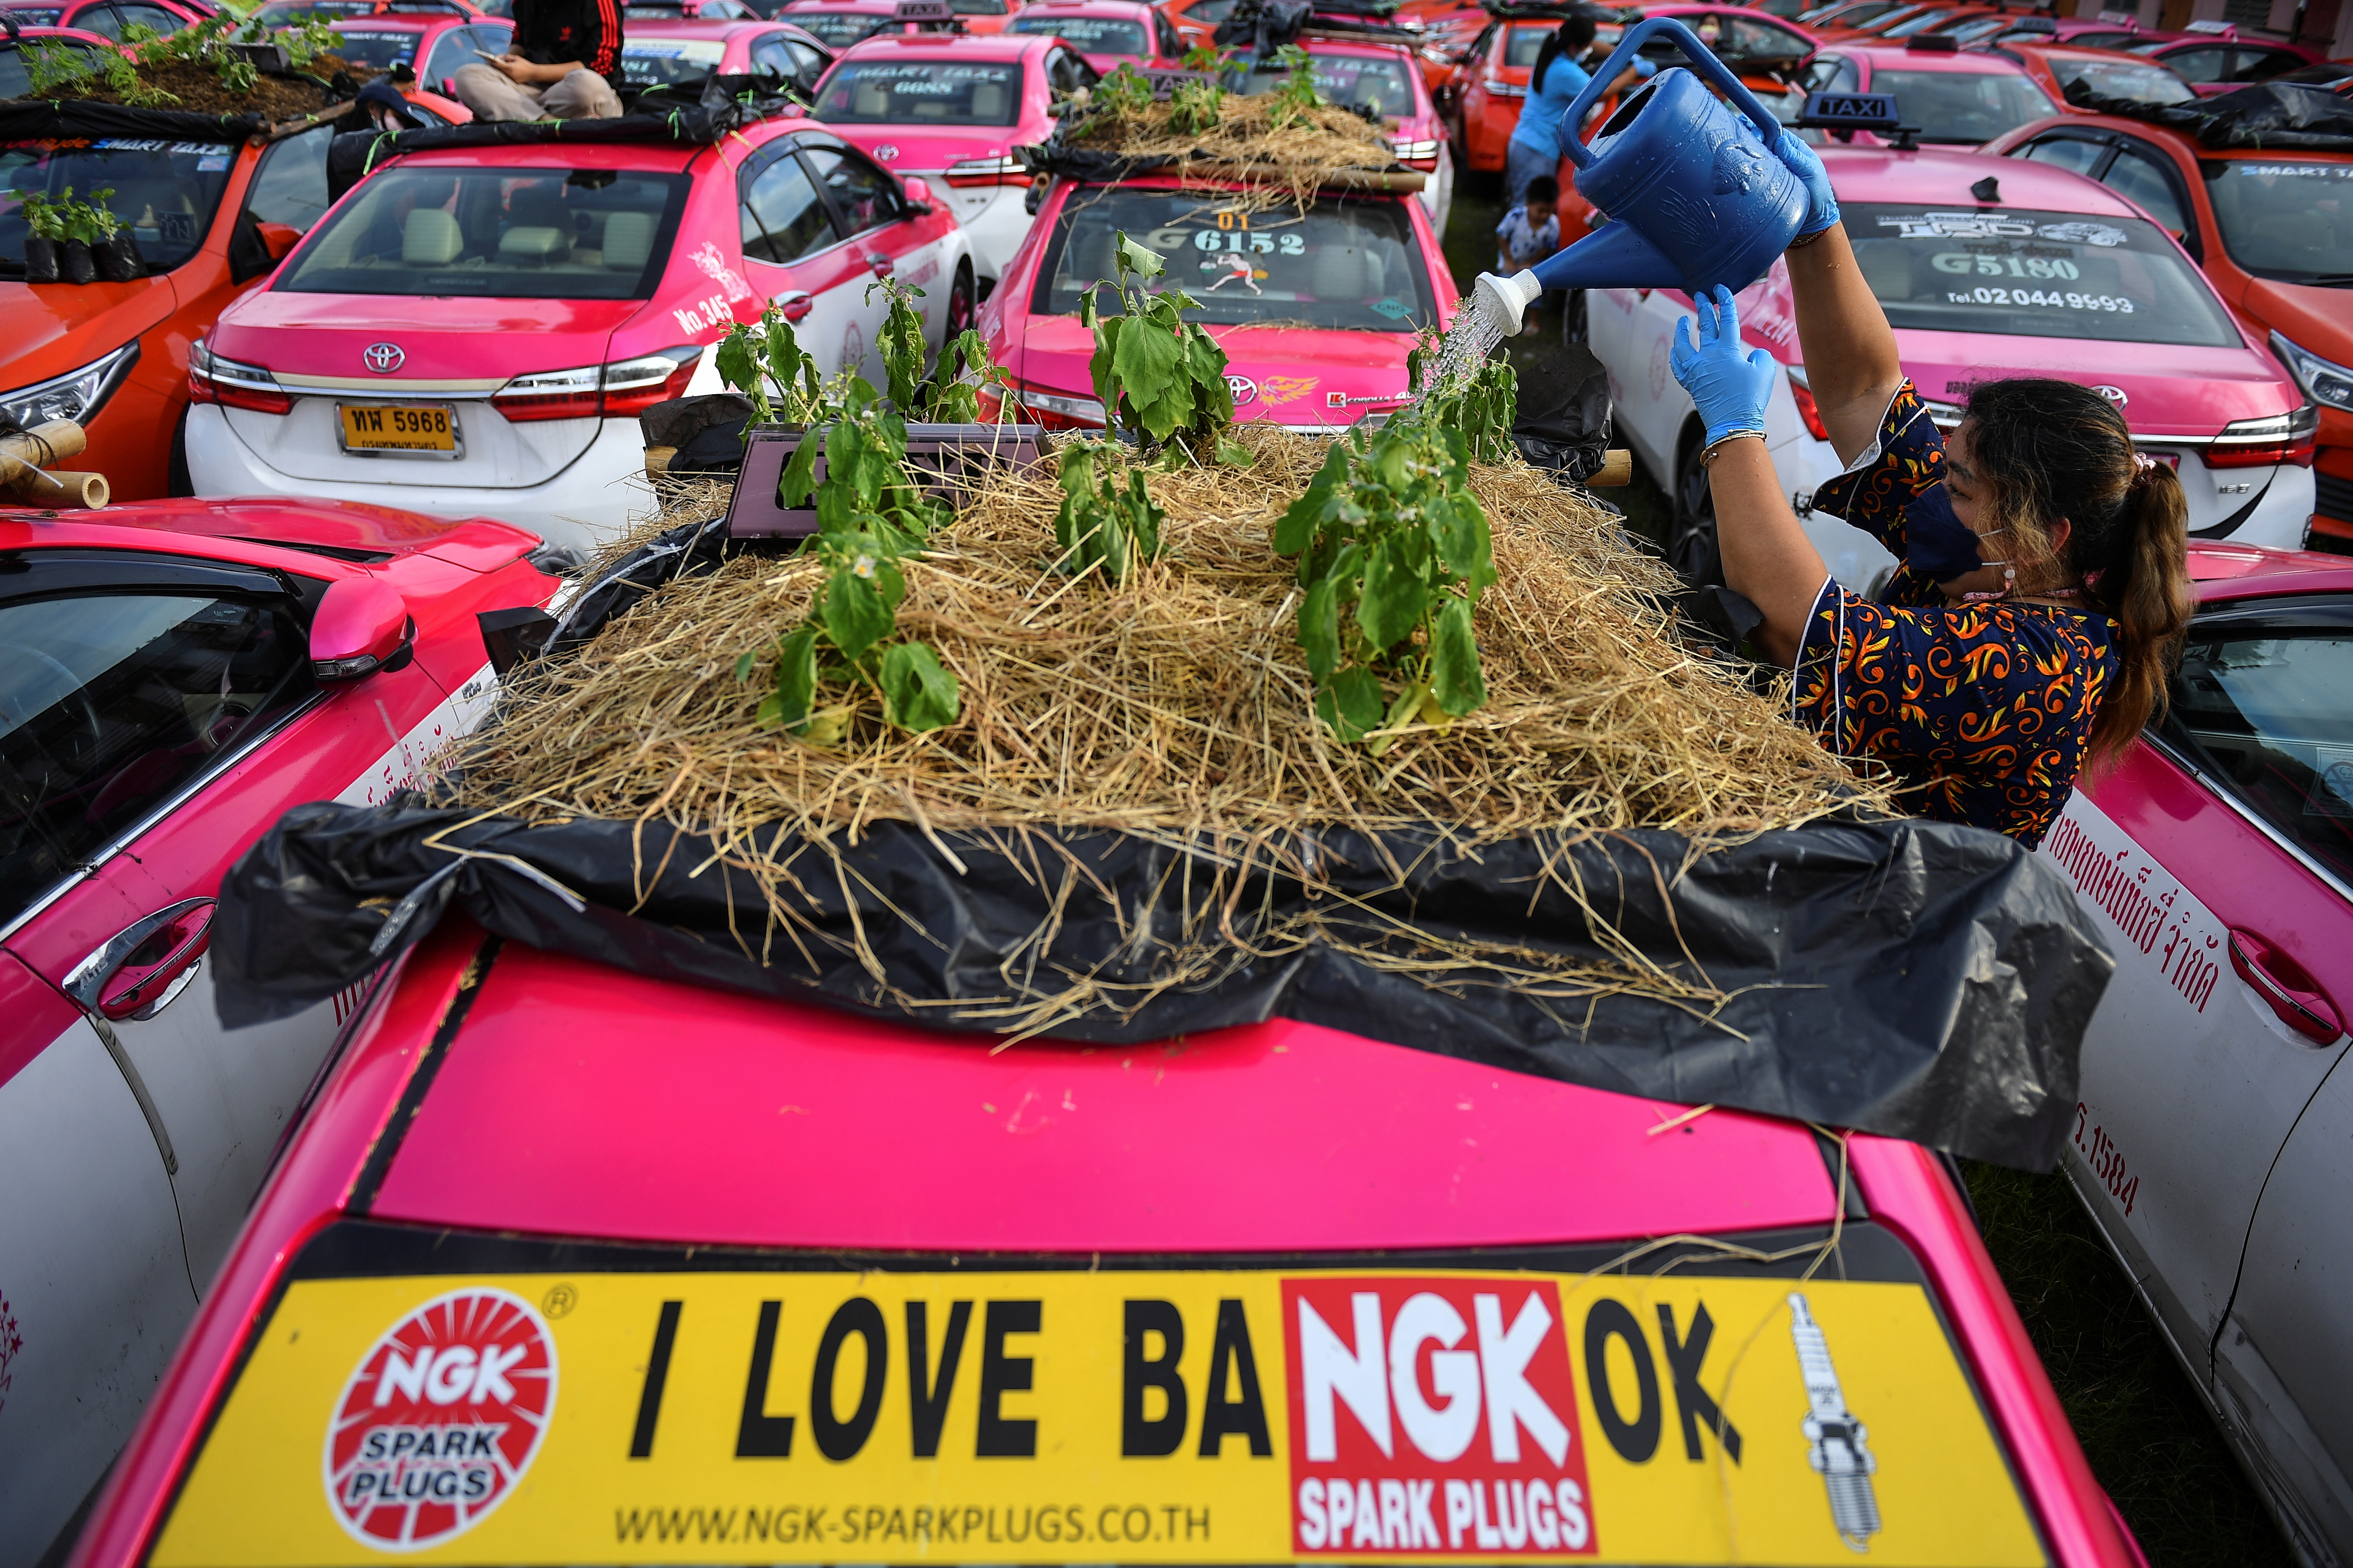 Taxi garages are converting unused taxi roofs into miniature gardens due to the COVID-19 crisis in Bangkok